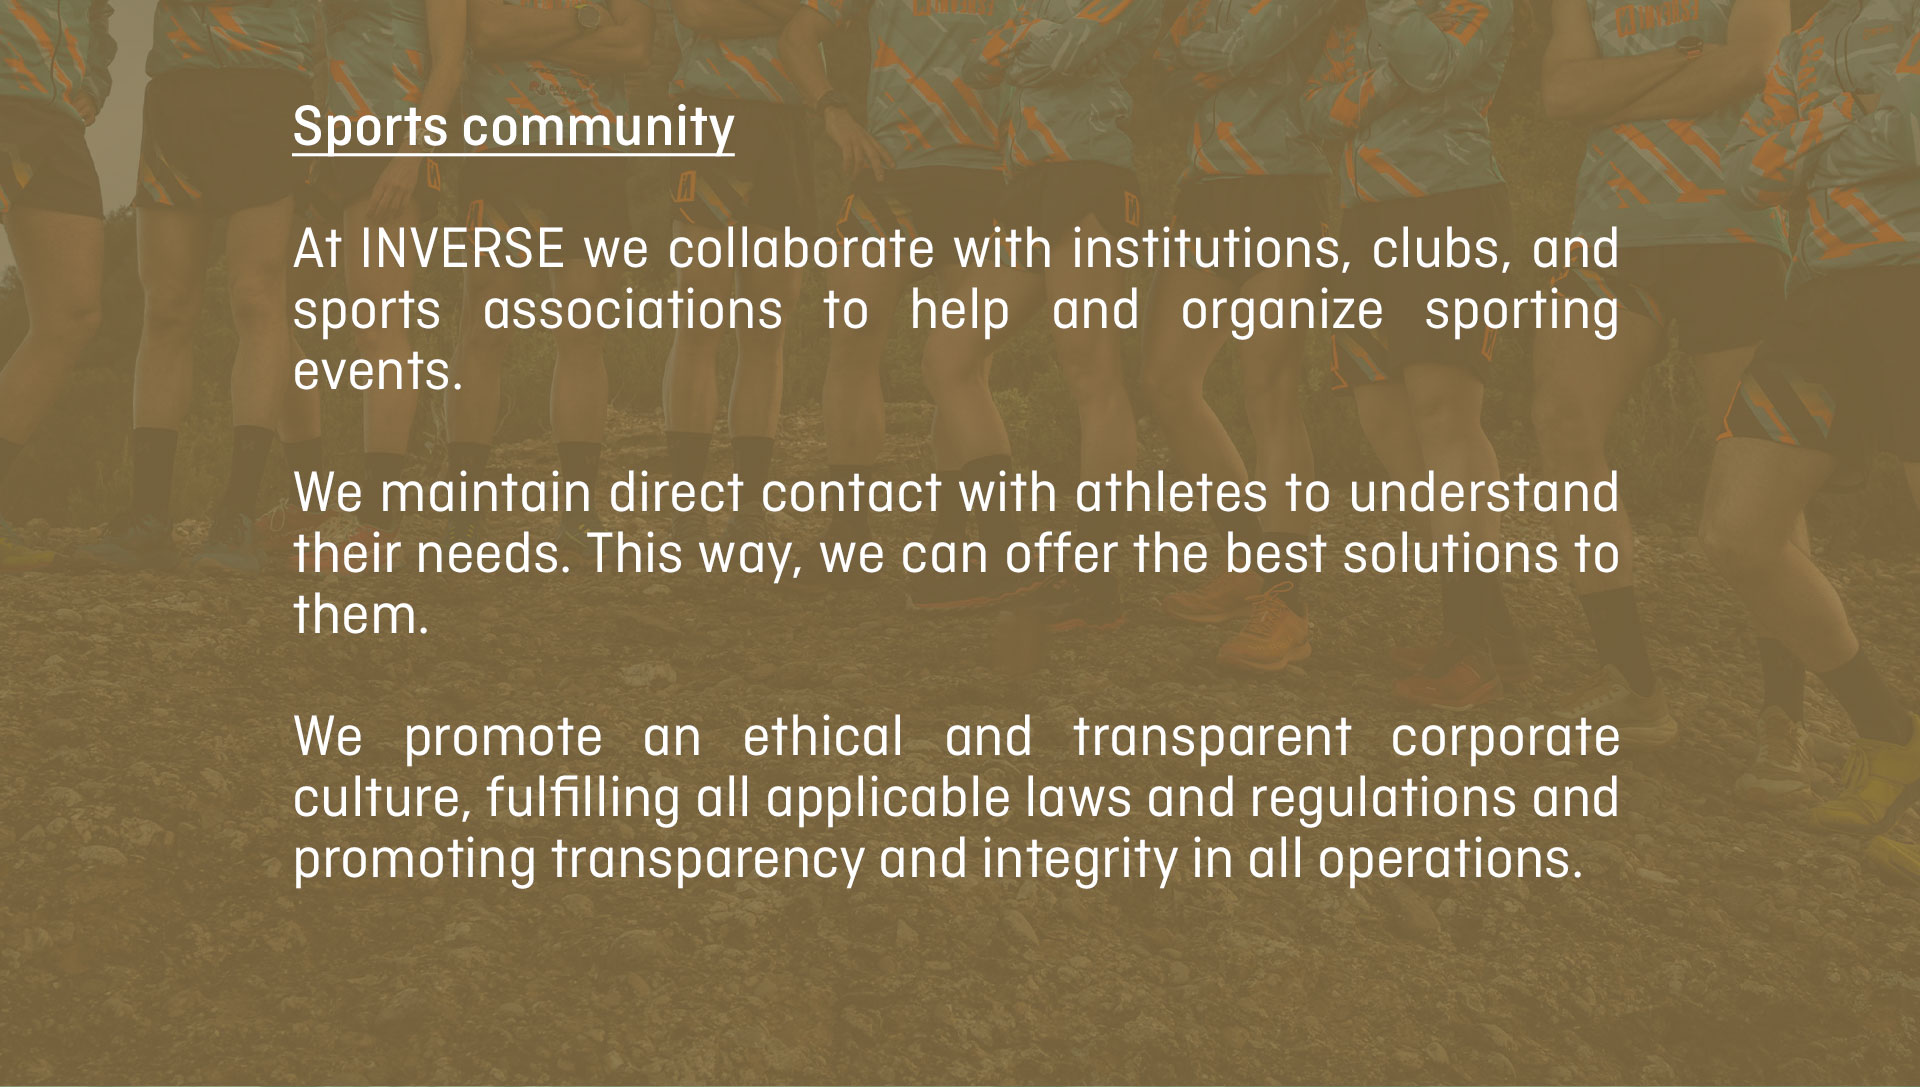 At INVERSE we collaborate with institutions, clubs, and sports associations to help and organize sporting events.